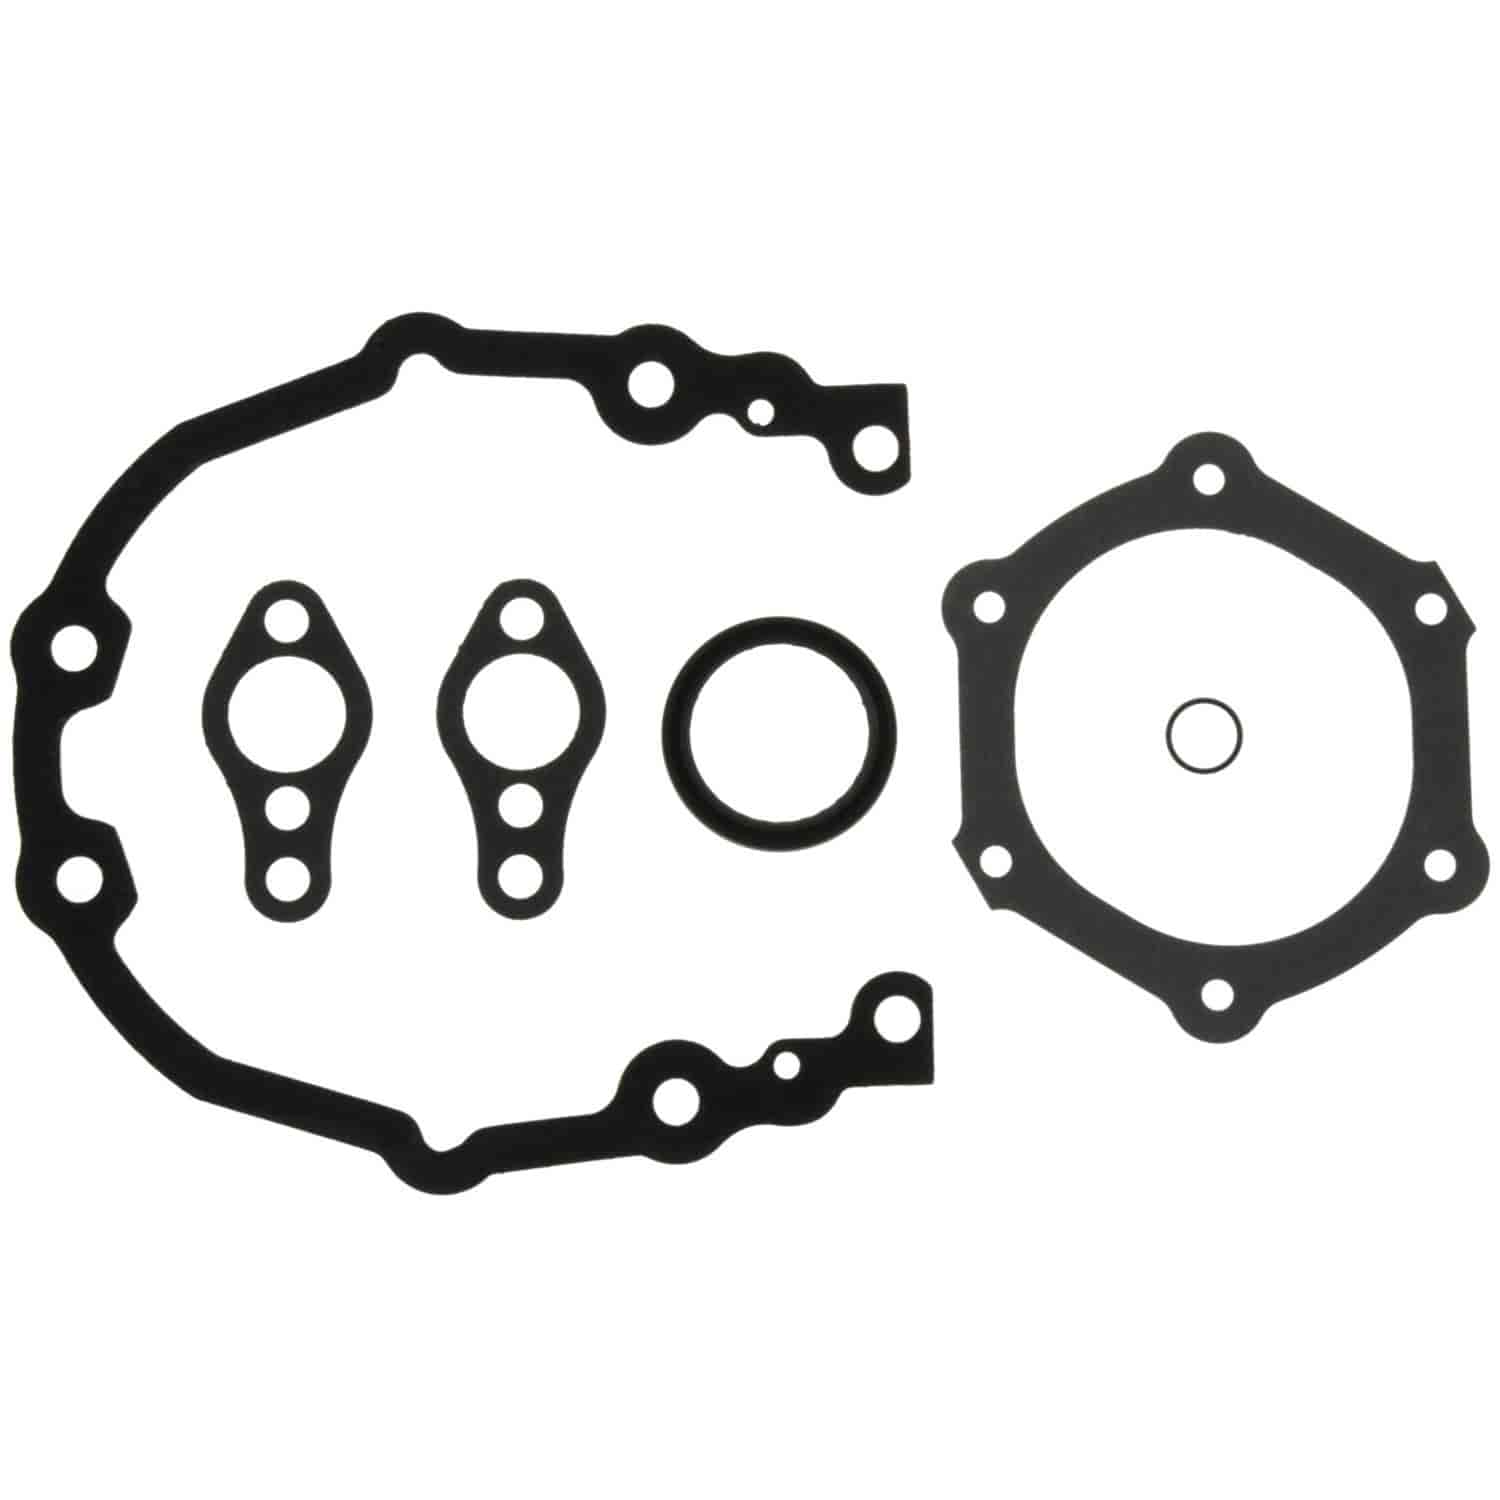 Timing Cover Set Chev 305 350 Engs. 96-03 1st Design 58mm seal